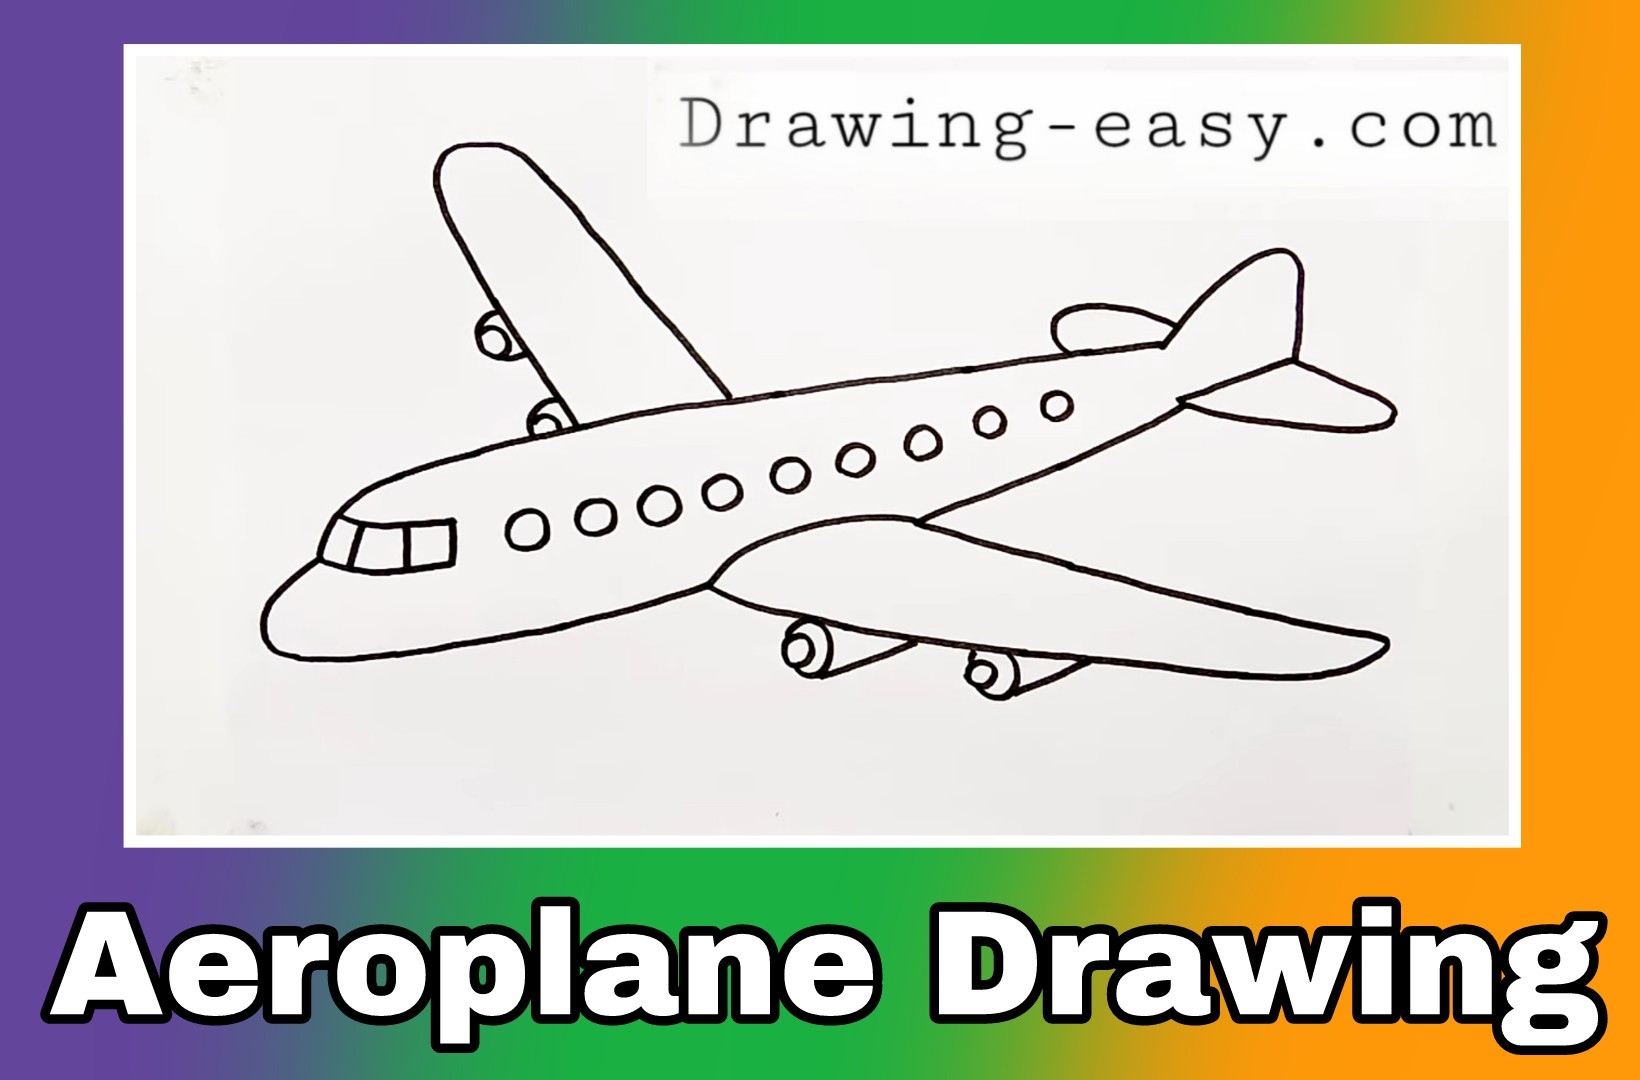 How To Draw A Plane Step By Step : How to draw a airplane 1. | Kpxmtxpgfv